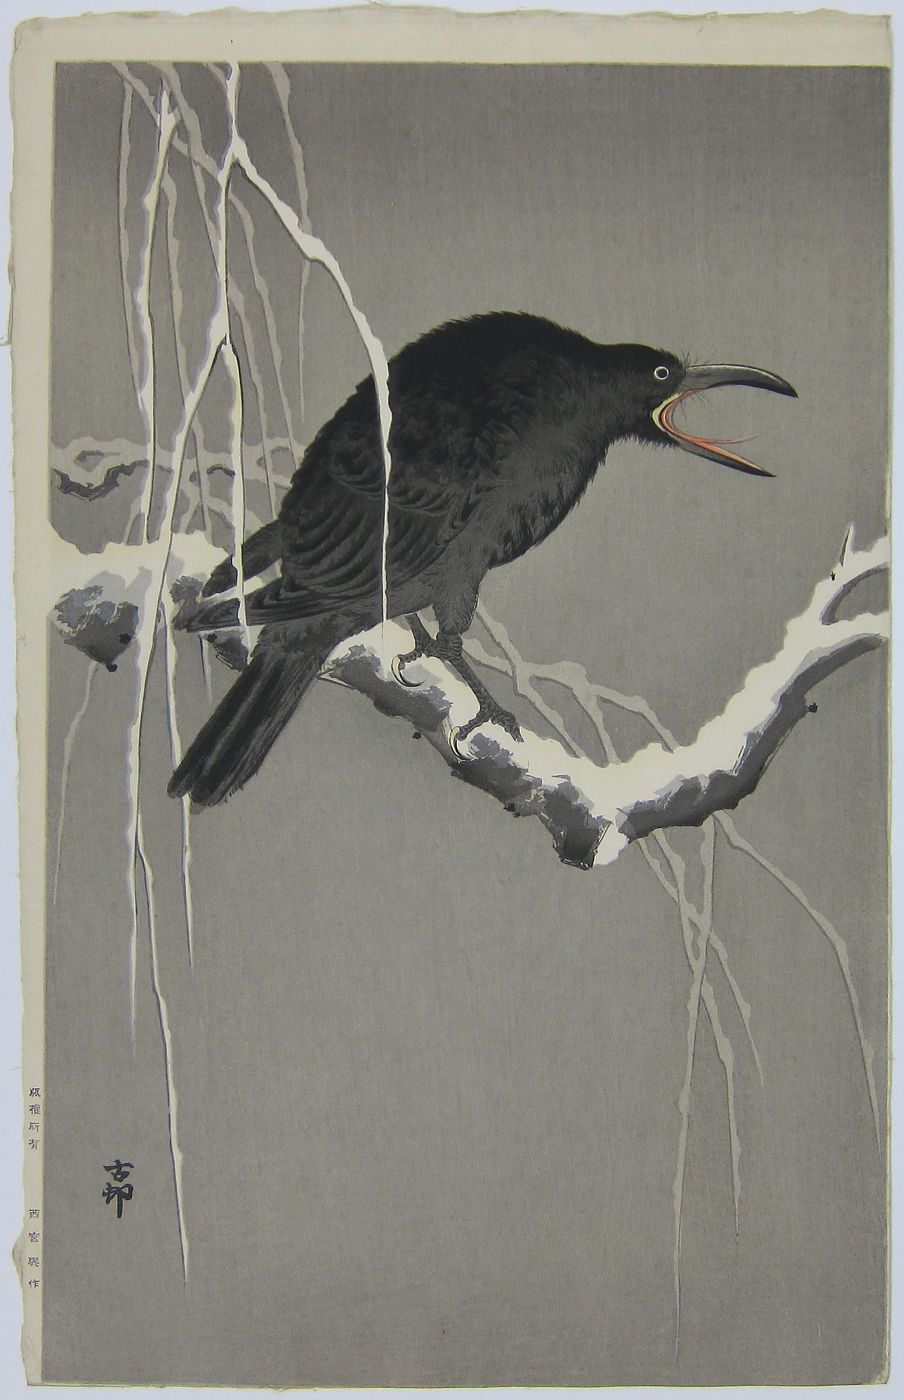 Cawing Crow on a Snowy Branch. c.1930